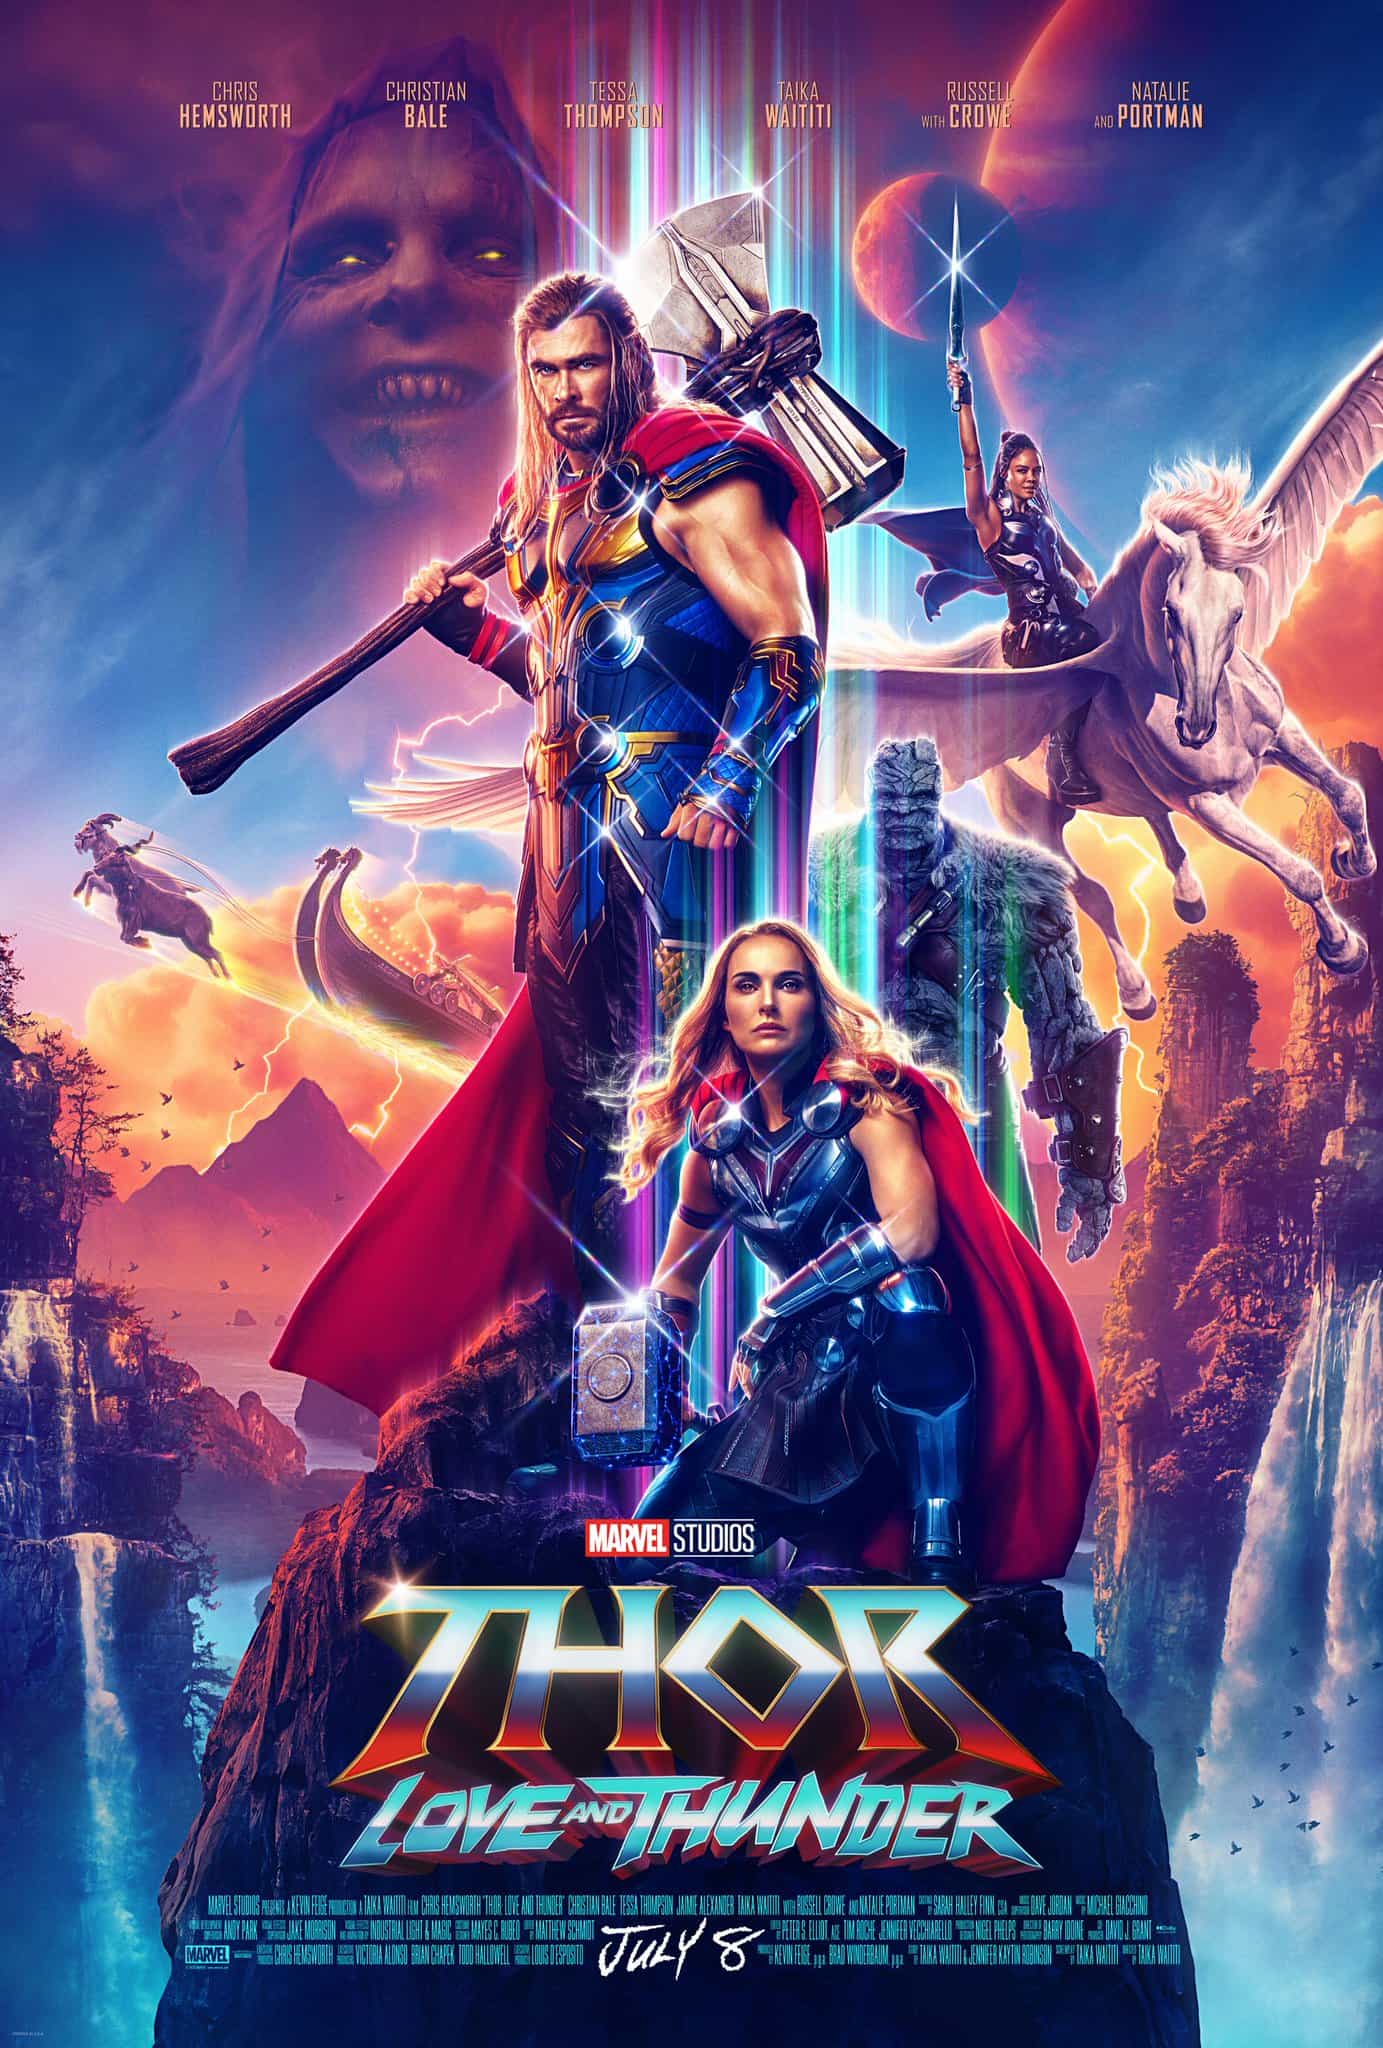 First trailer and poster finally released for Thor: Love and Thunder which stars Chris Hemsworth - movie UK release date 8th July 2022 #thorloveandthunder